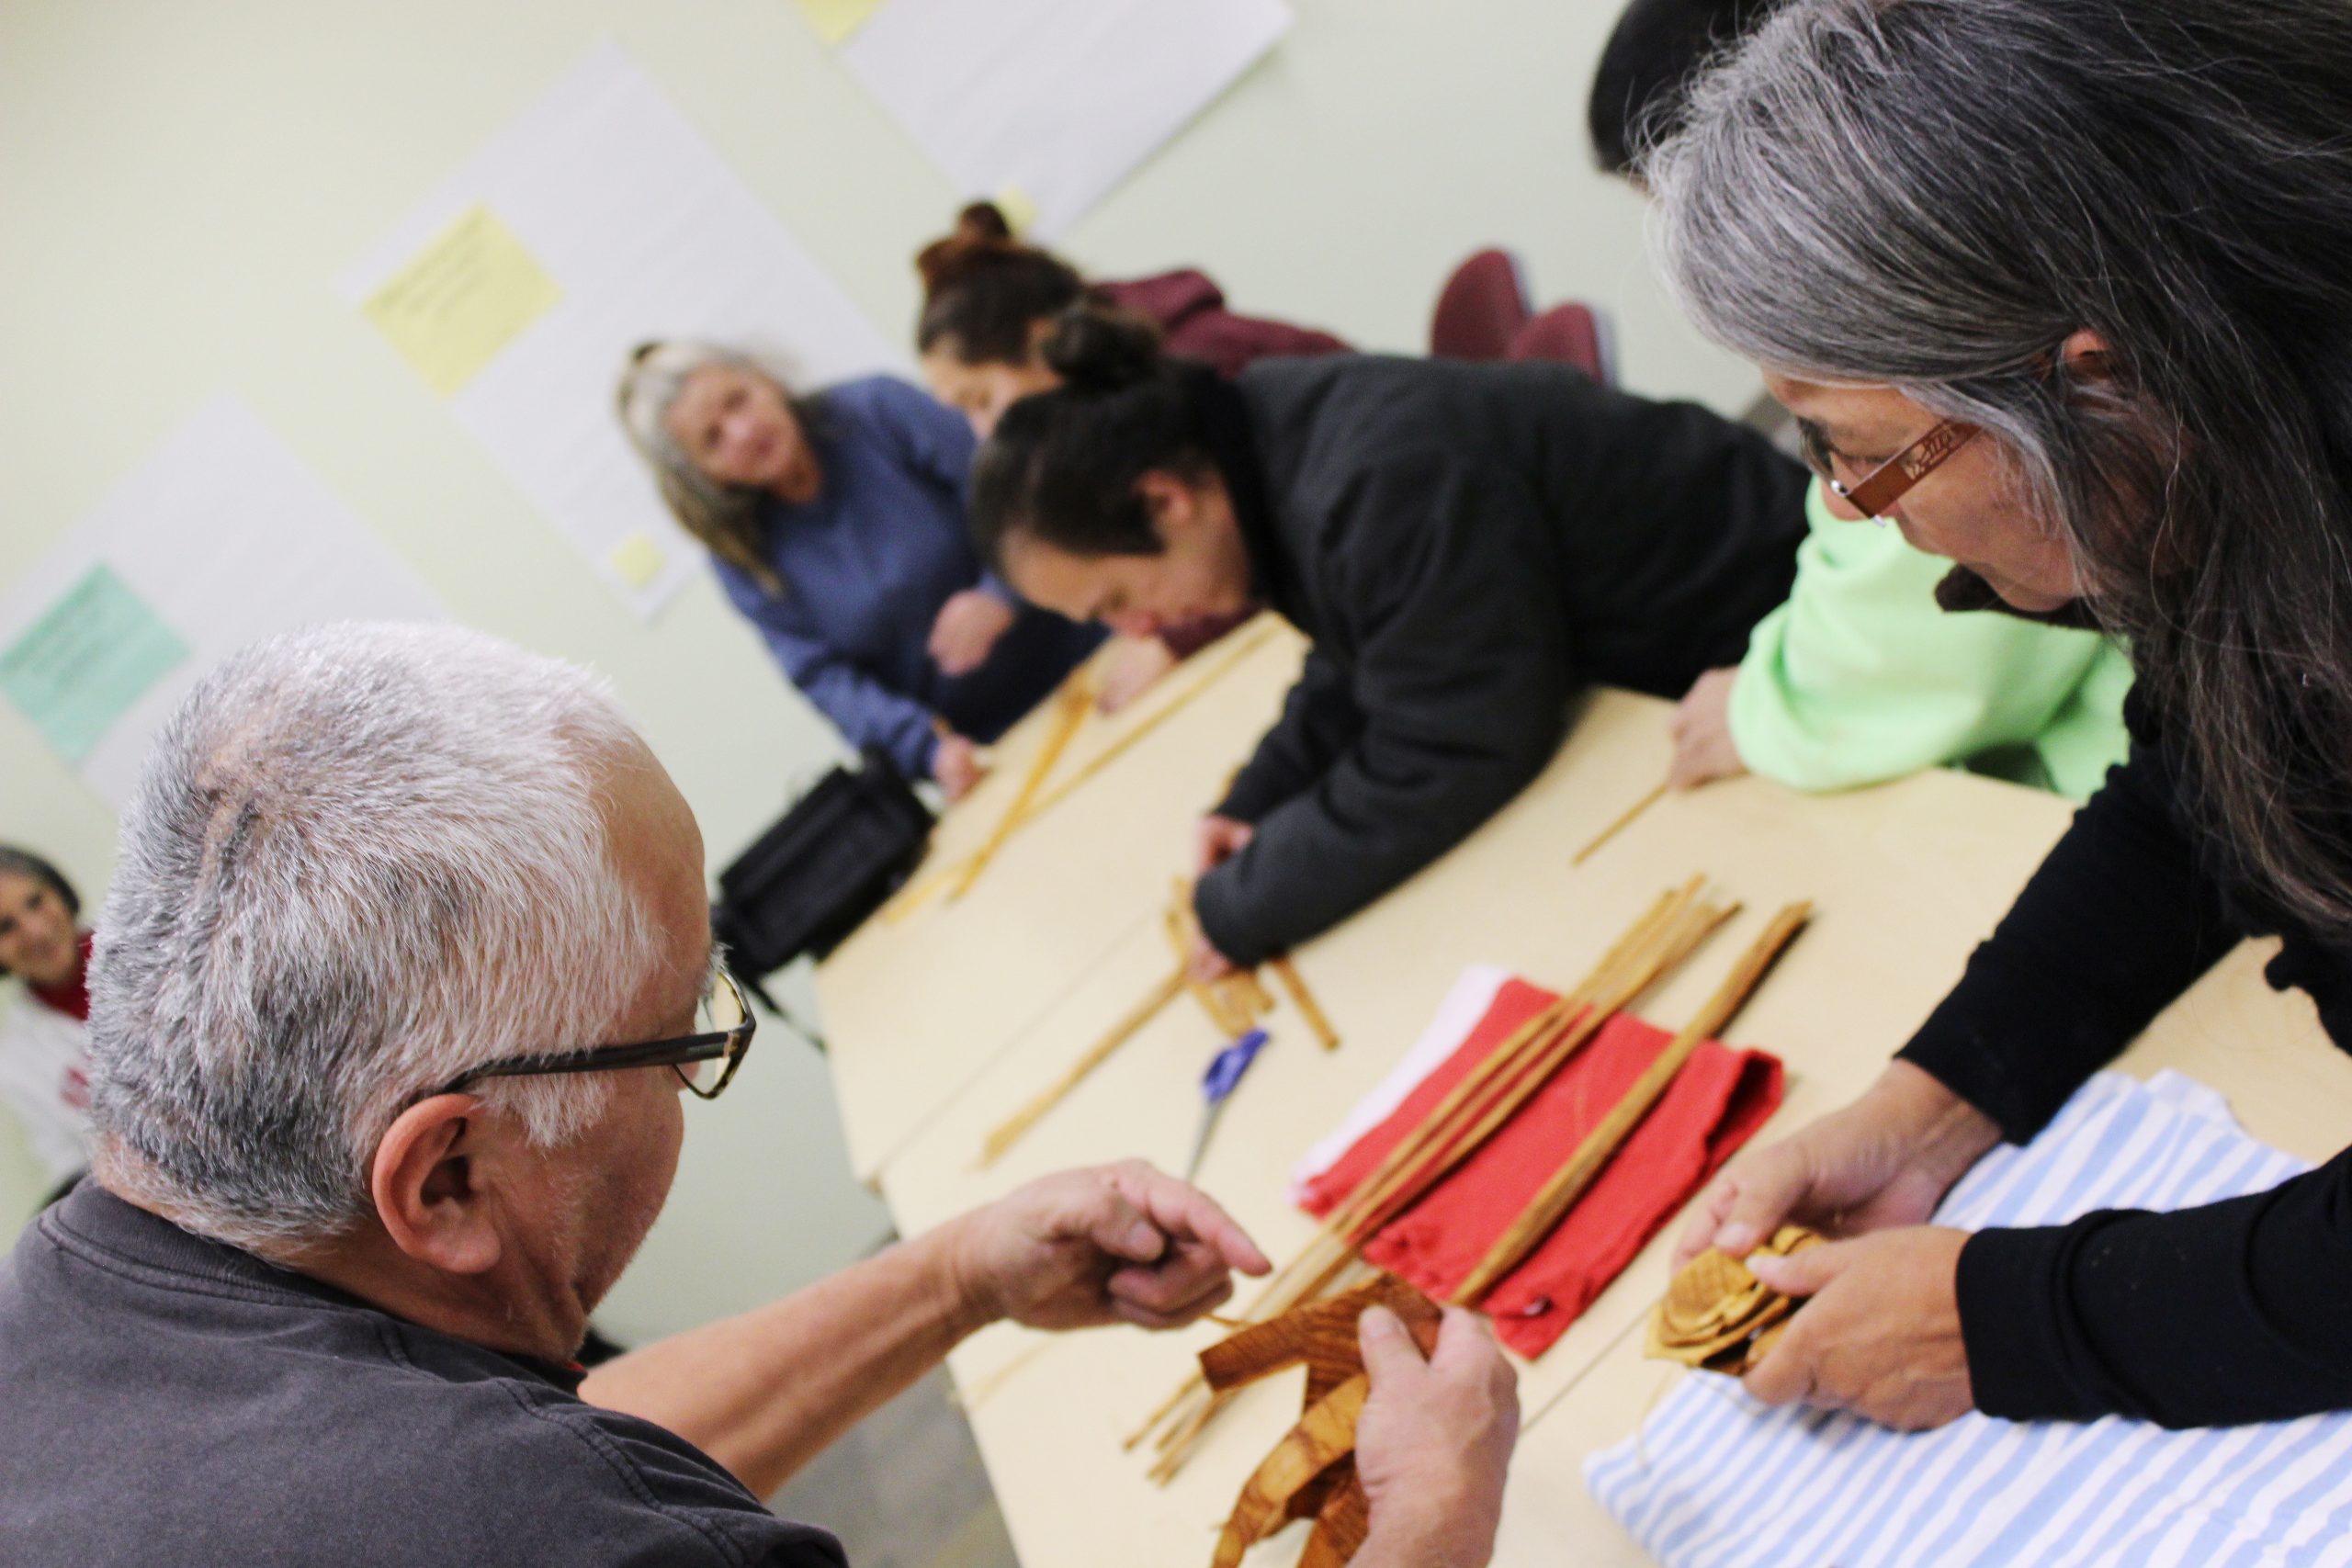 Weaving activity participants were able to create cedar roses and bracelets using the bark of Western Red Cedar.